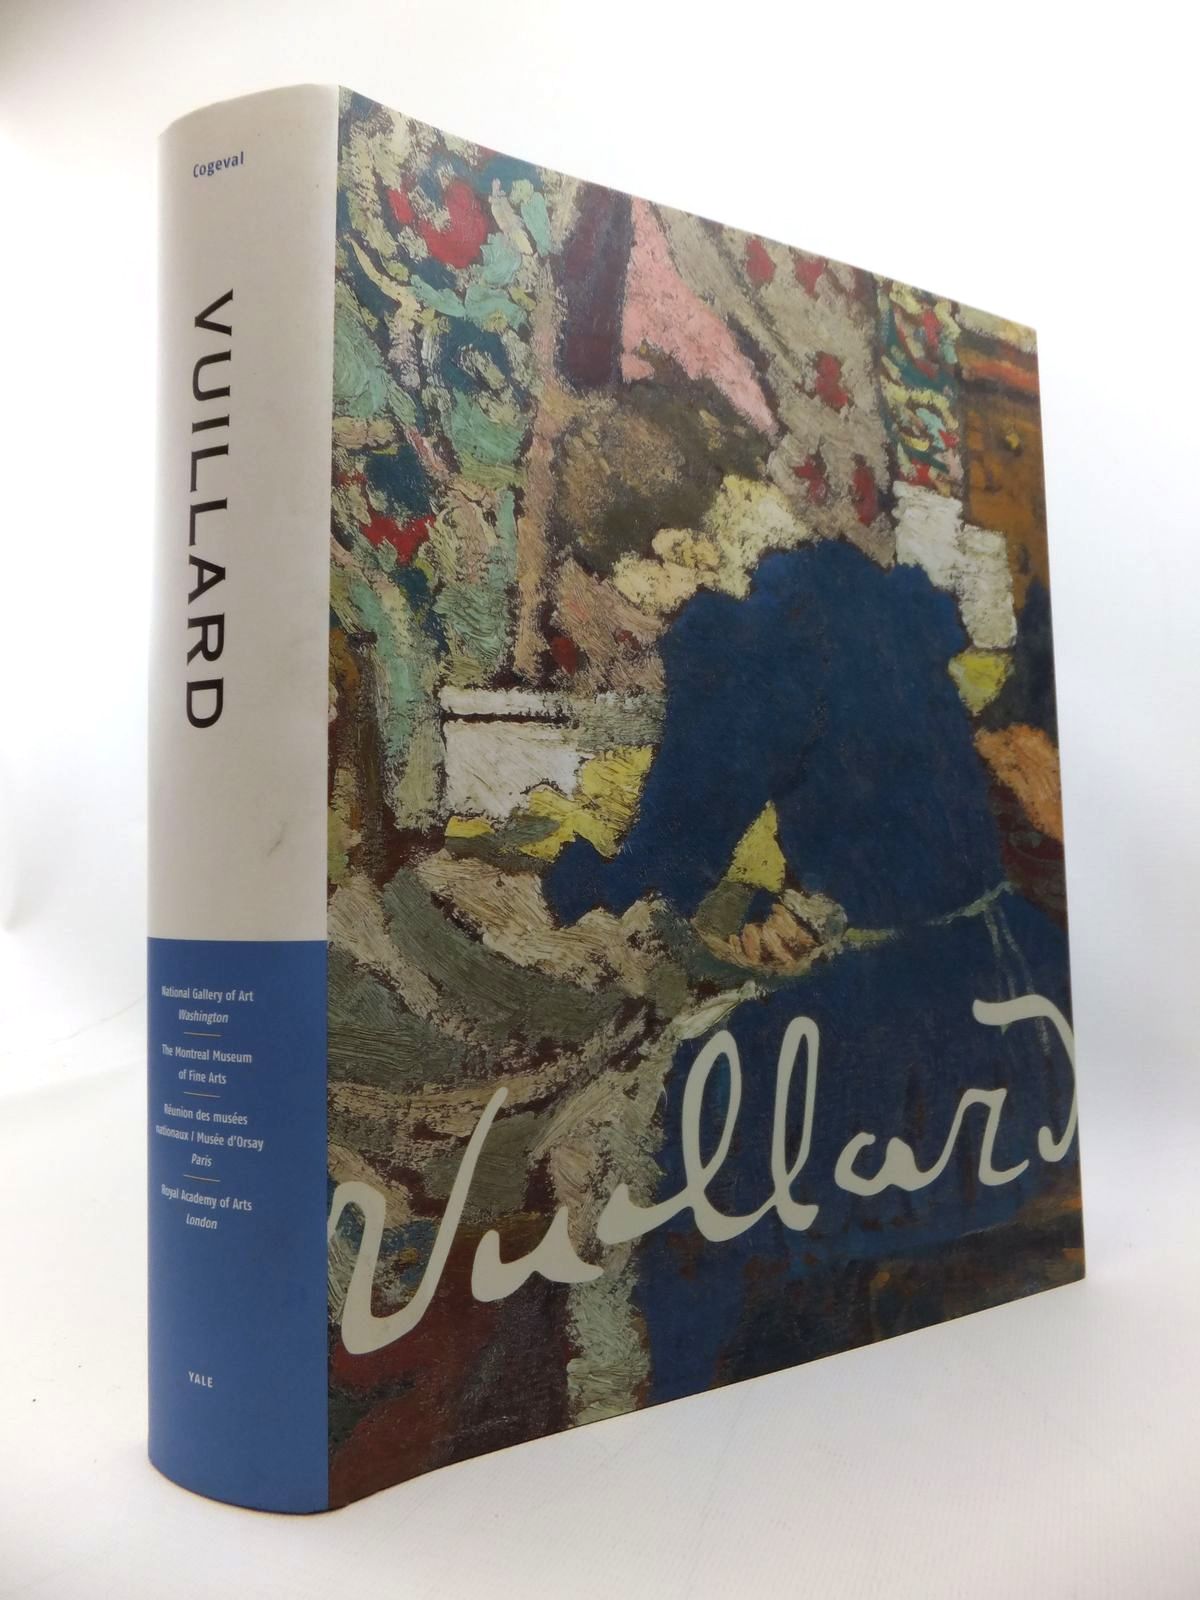 Photo of EDOUARD VUILLARD written by Cogeval, Guy et al, illustrated by Vuillard, Edouard published by The Montreal Museum Of Fine Arts, The National Gallery Of Art, Washington, Yale University Press (STOCK CODE: 1814482)  for sale by Stella & Rose's Books